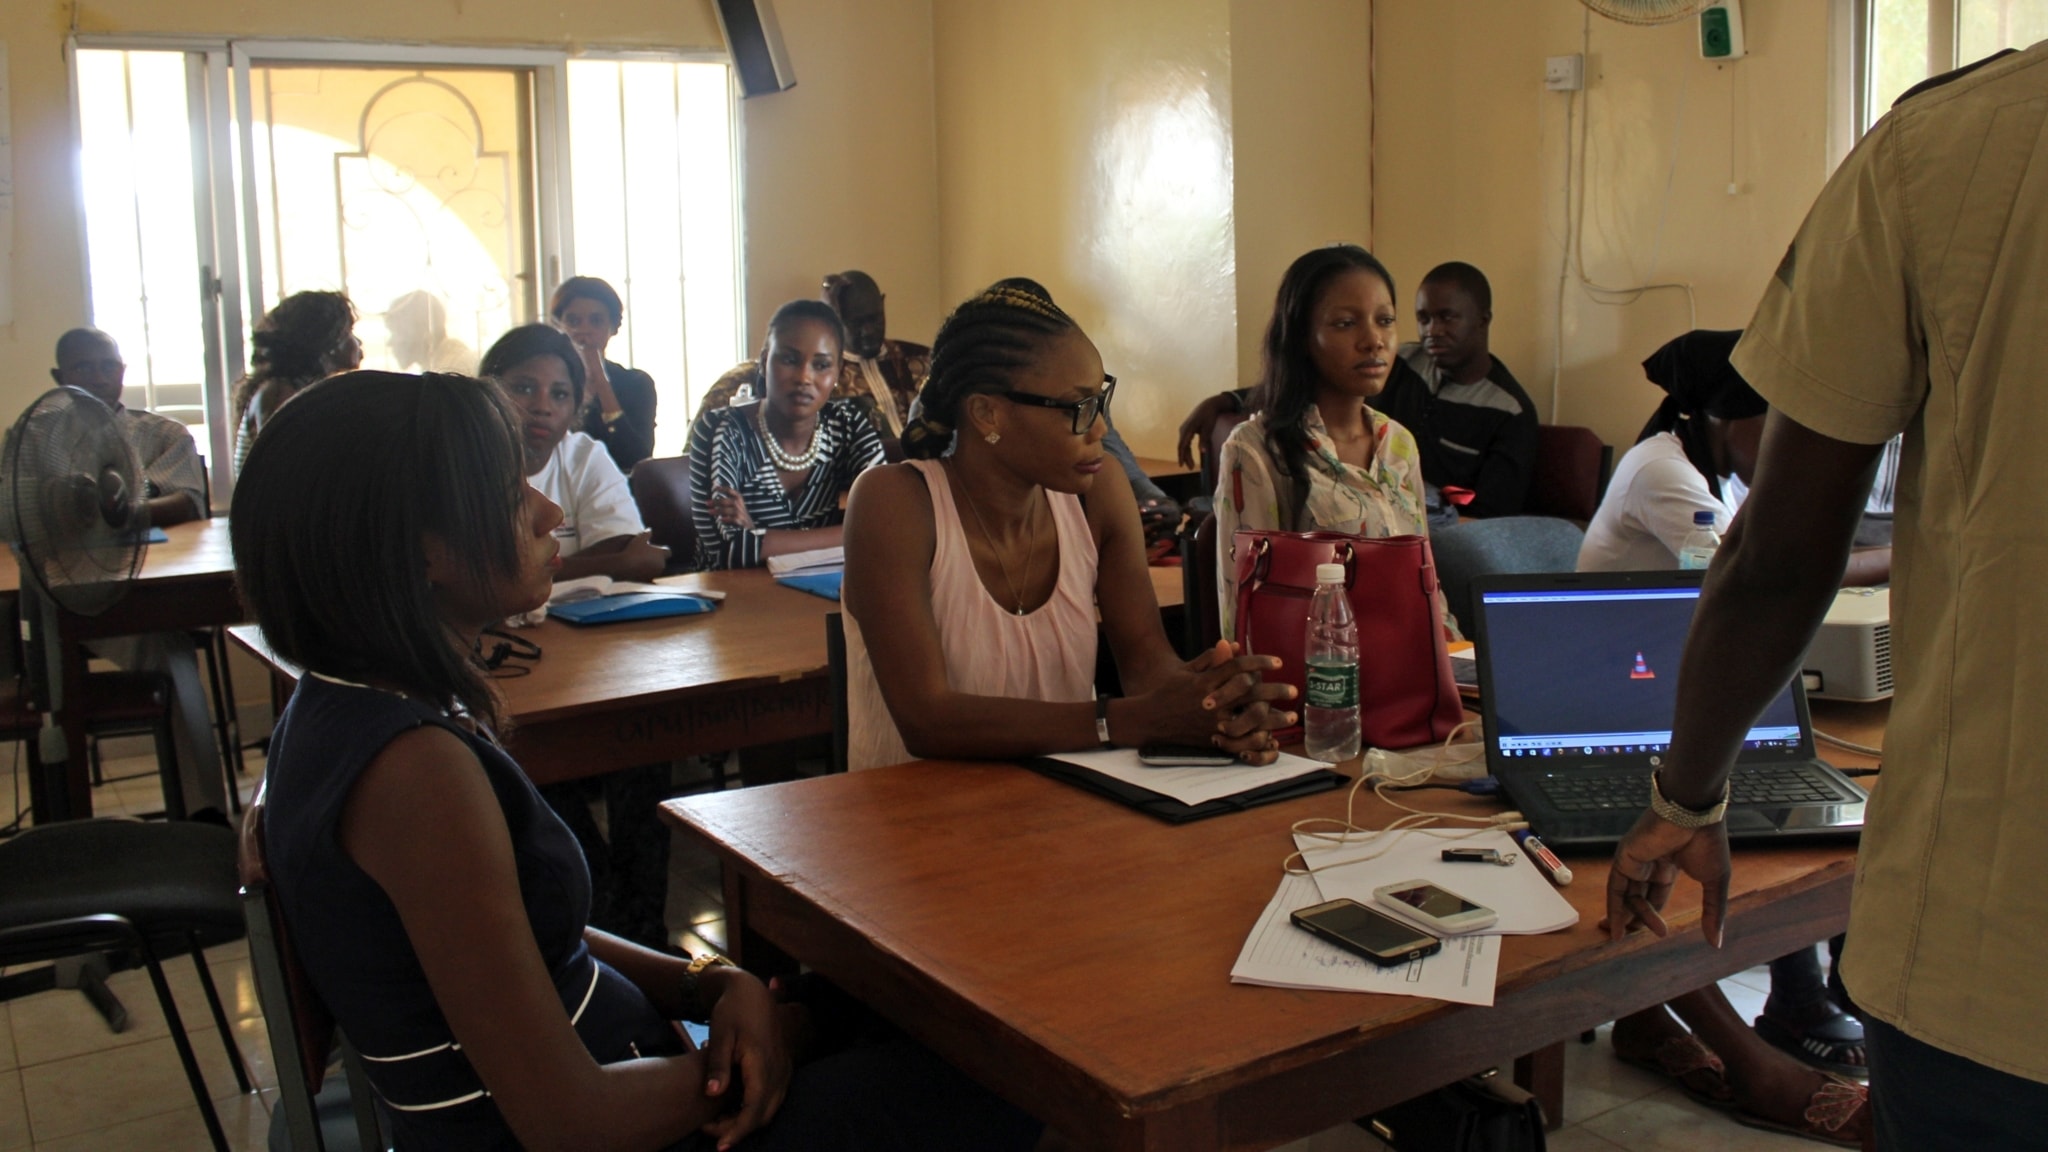 Mid-term evaluation of the “Youth Empowerment through TVET in The Gambia” project